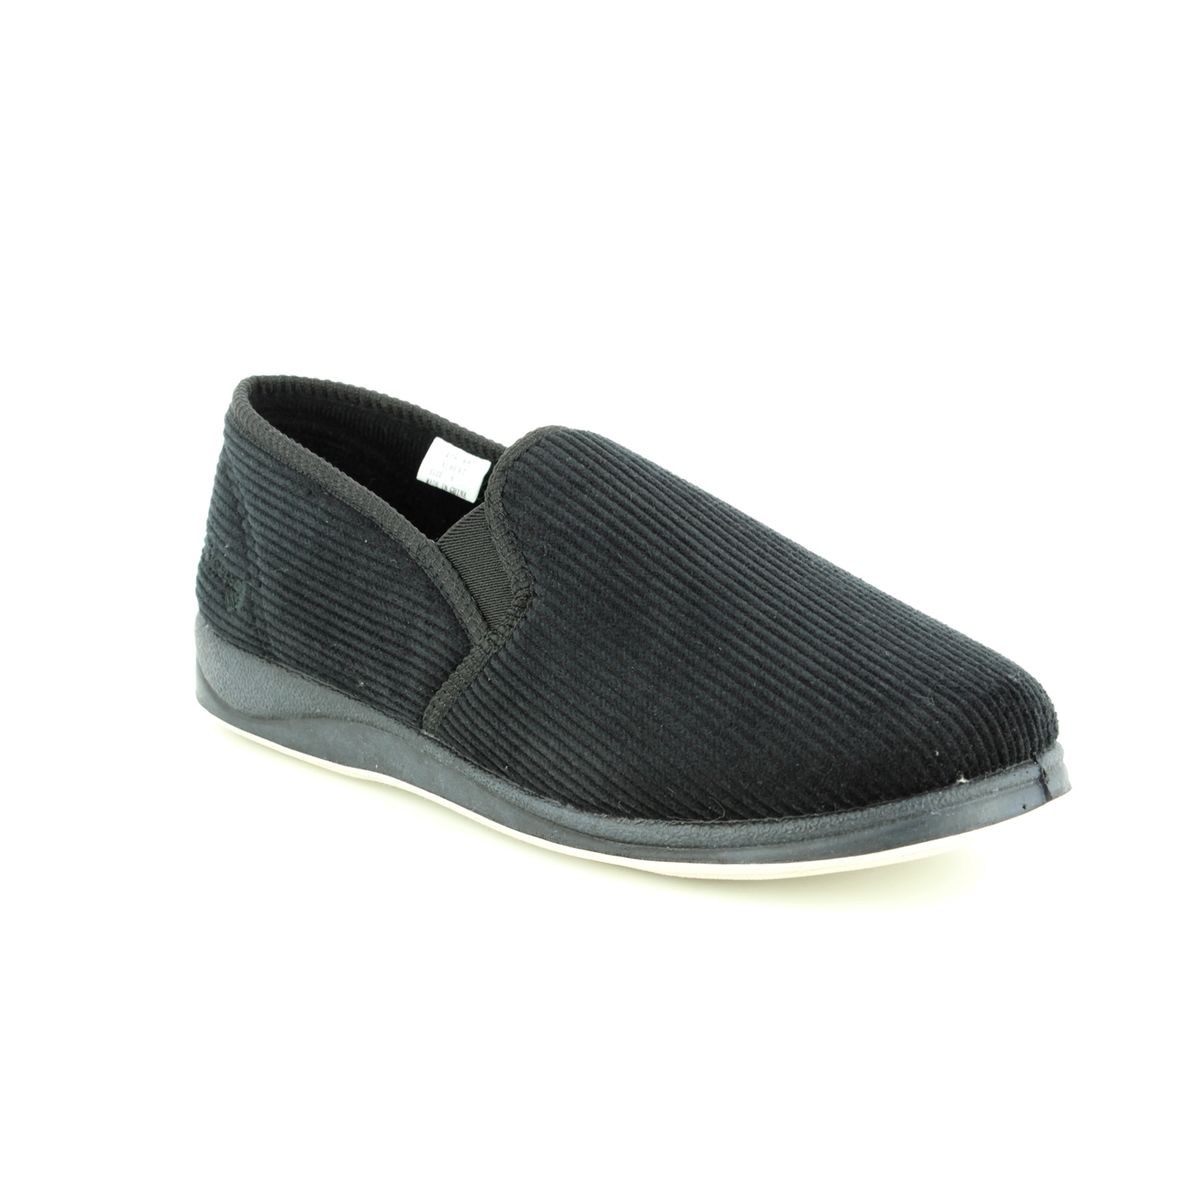 Padders Albert G Fit Black Mens slippers 408S-40 in a Plain Textile in Size 9